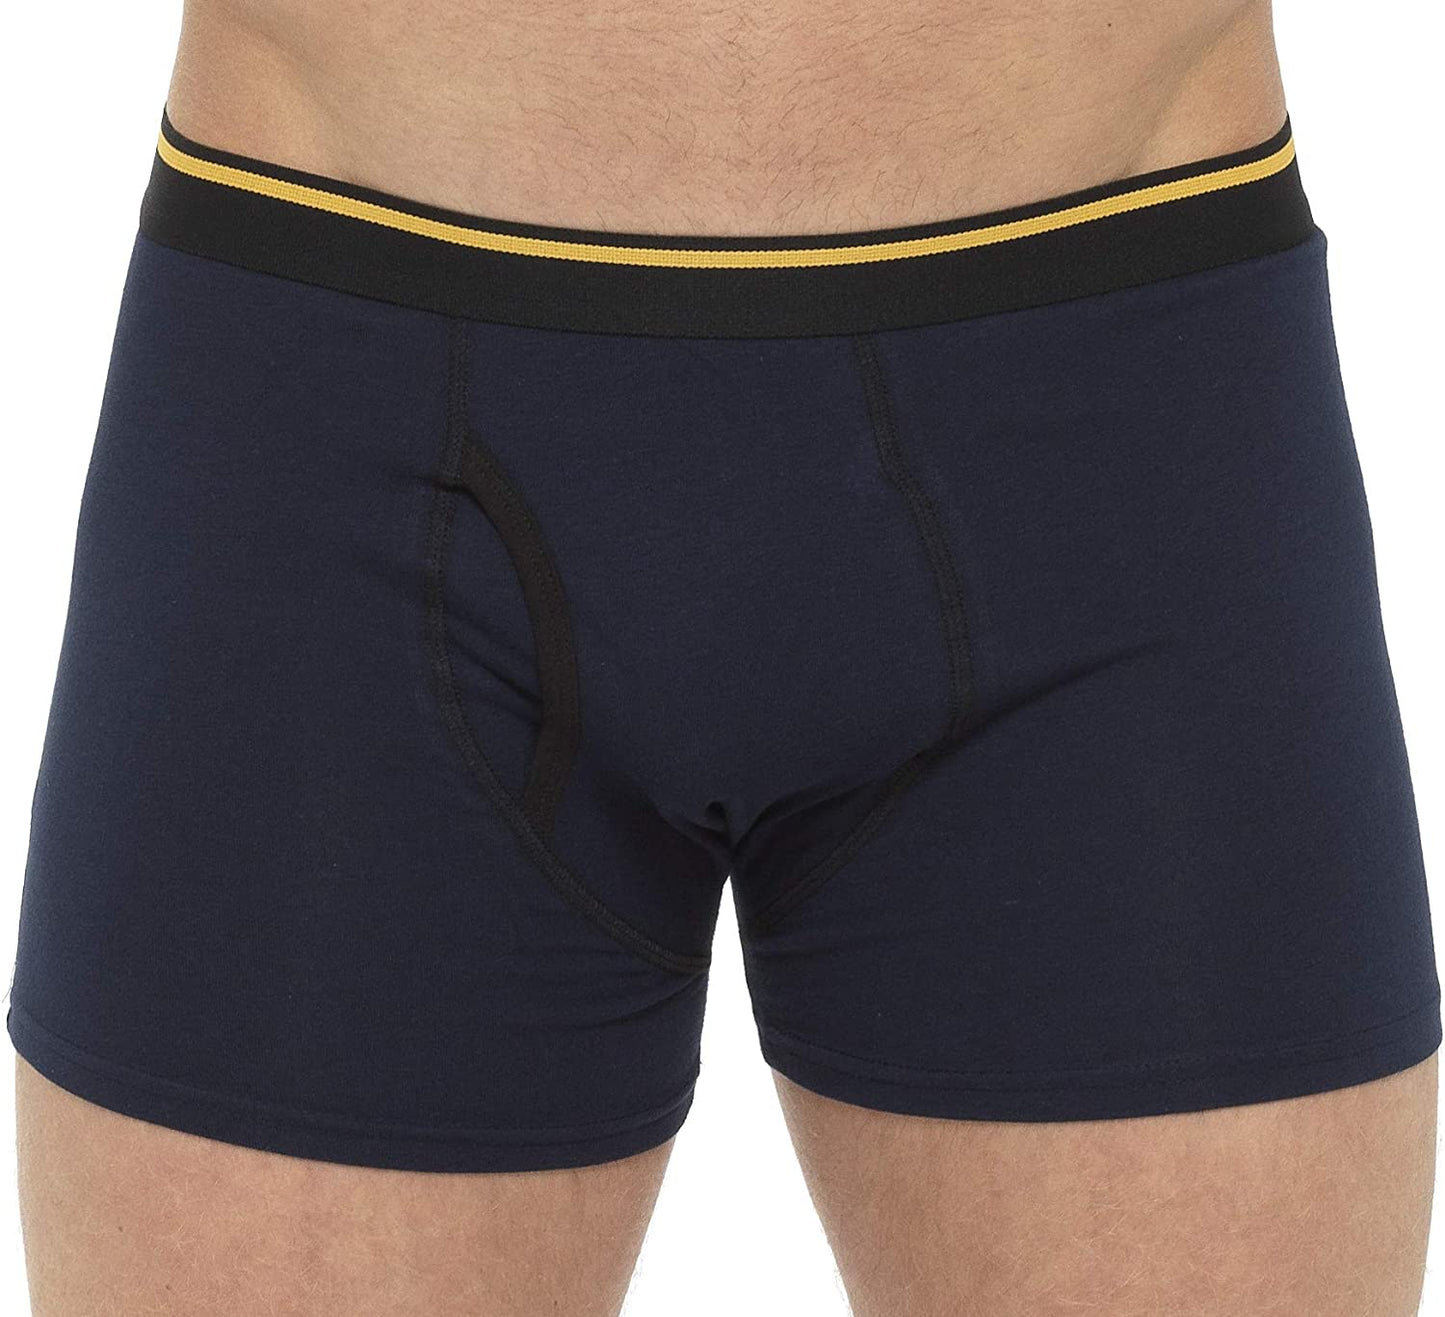 6 Pack Men's Cotton Rich Trunks with Keyhole